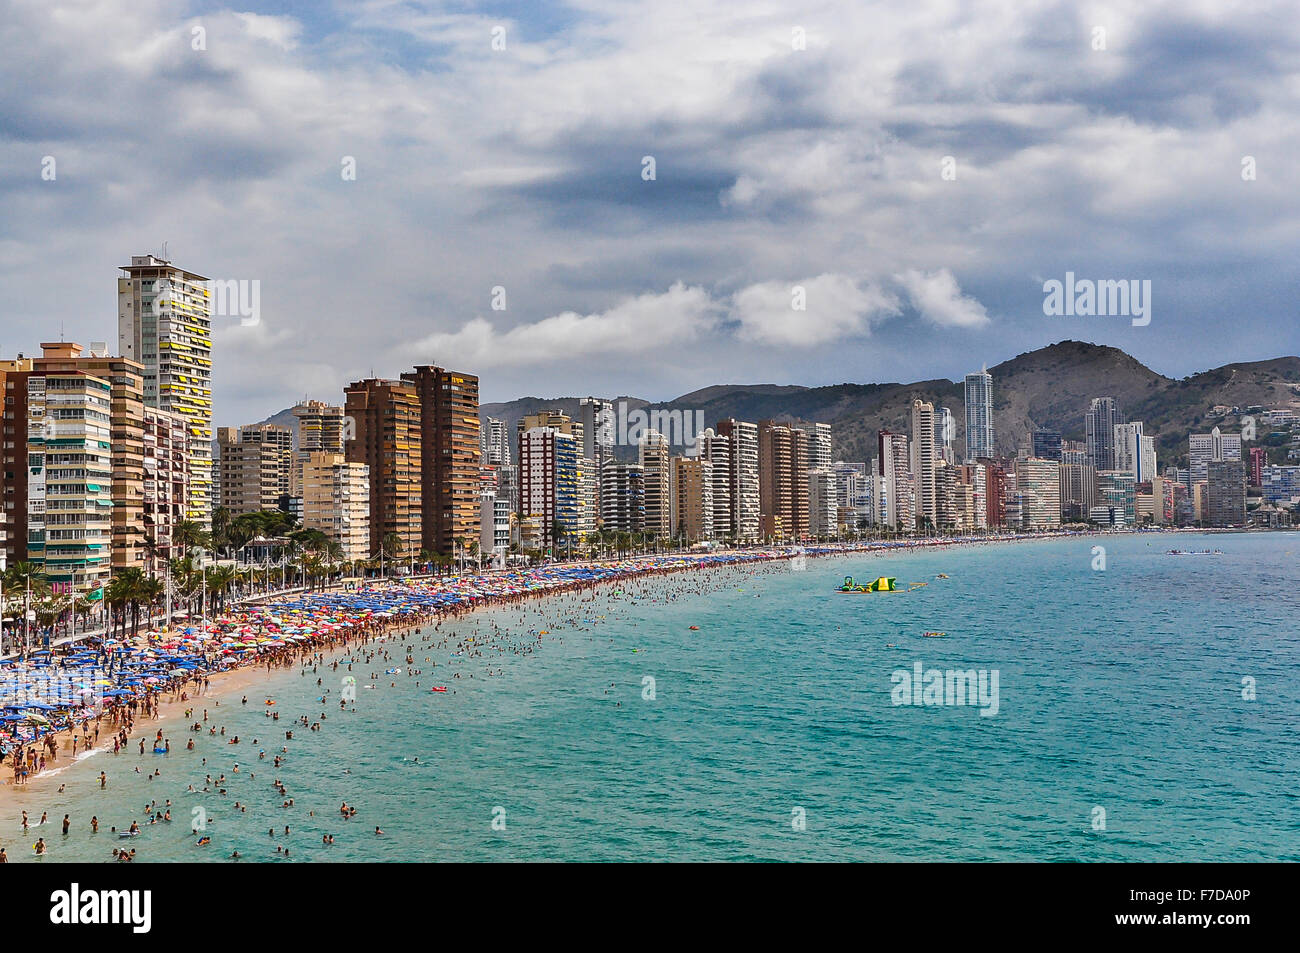 Crowded beach of Benidorm on a cloudy day, Spain Stock Photo